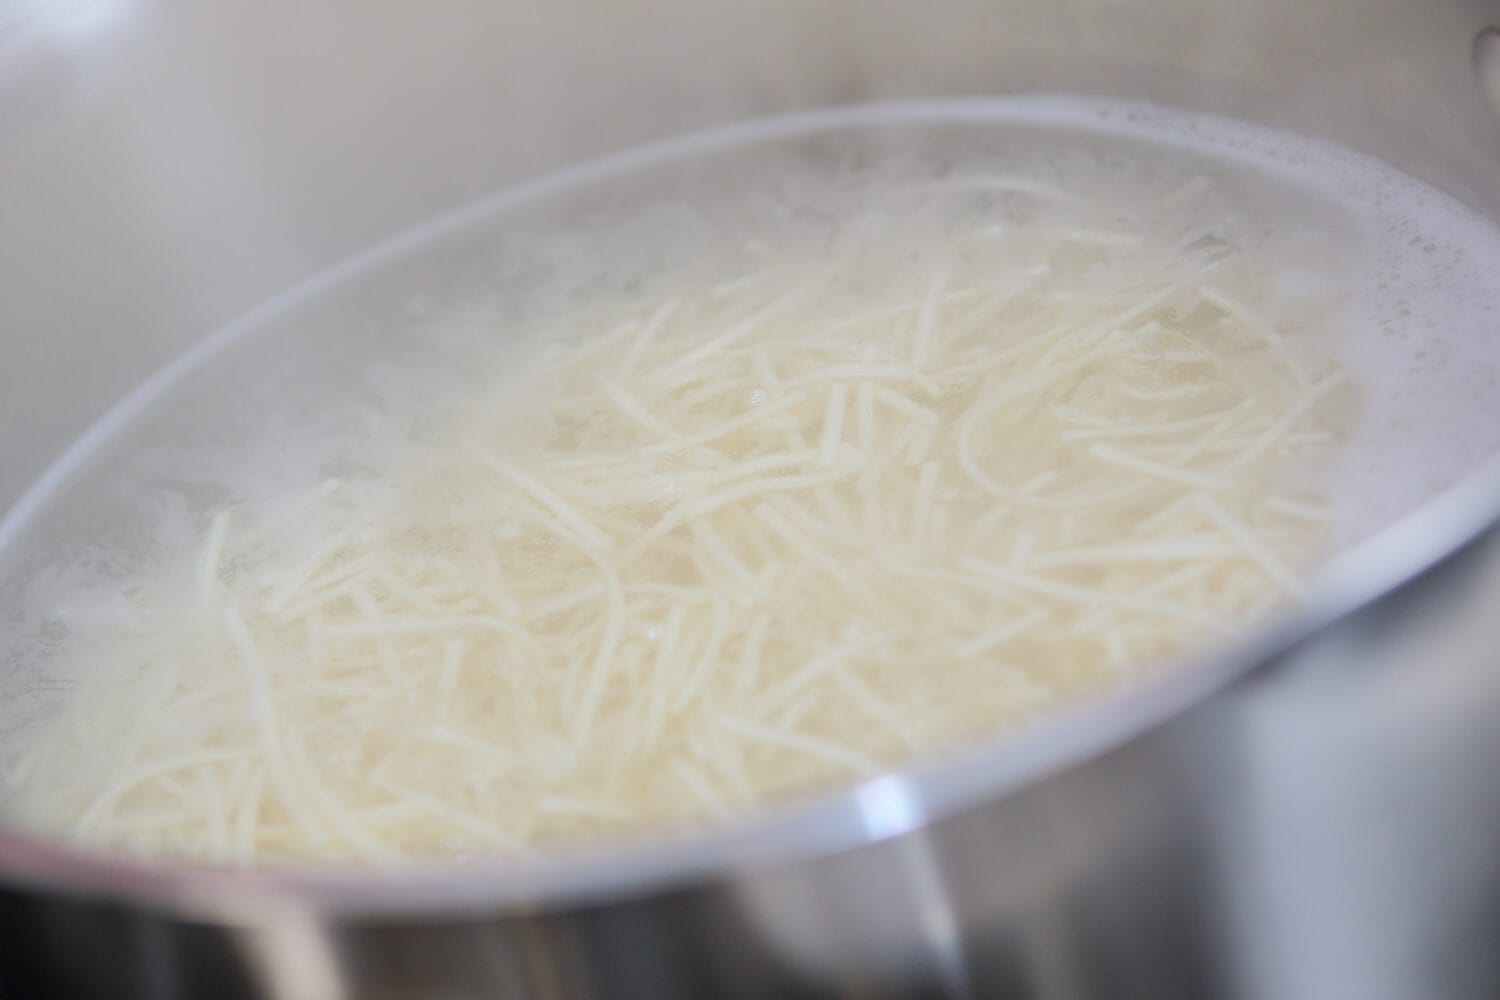 Cooking pasta. Close up view of boiling instant noodles in the pot.